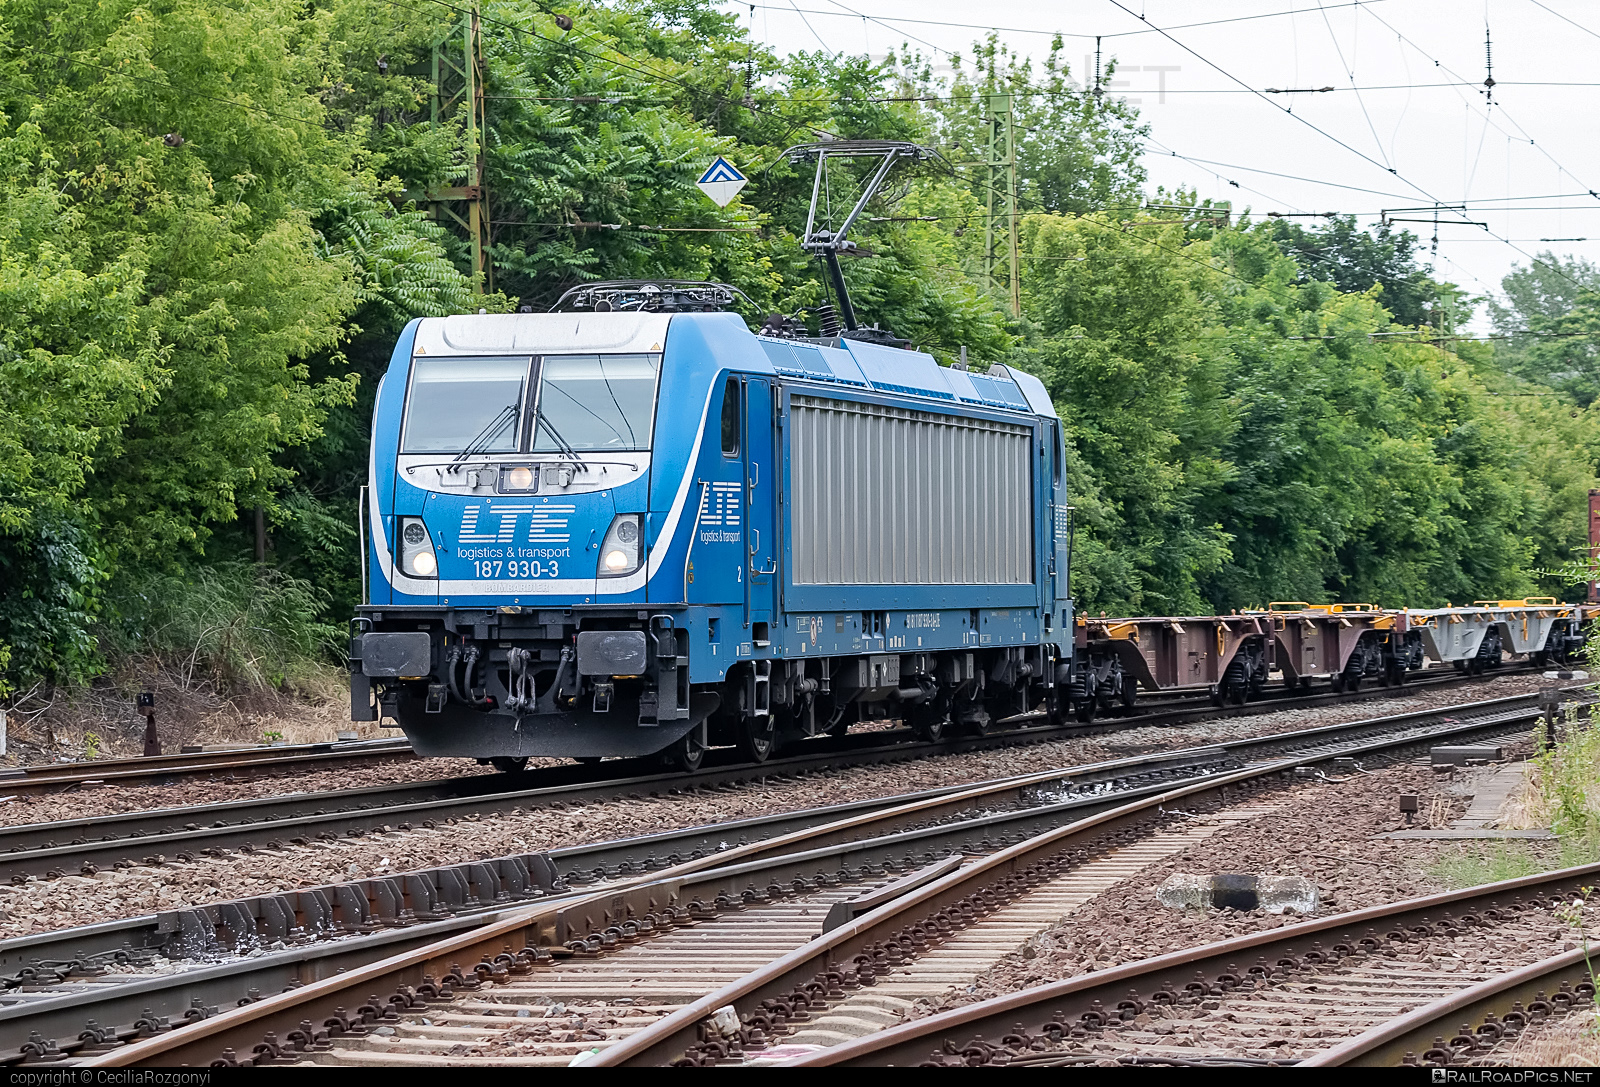 Bombardier TRAXX F160 AC3 - 187 930-3 operated by LTE Logistik und Transport GmbH #bombardier #bombardiertraxx #flatwagon #lte #ltelogistikundtransport #ltelogistikundtransportgmbh #traxx #traxxf160 #traxxf160ac #traxxf160ac3